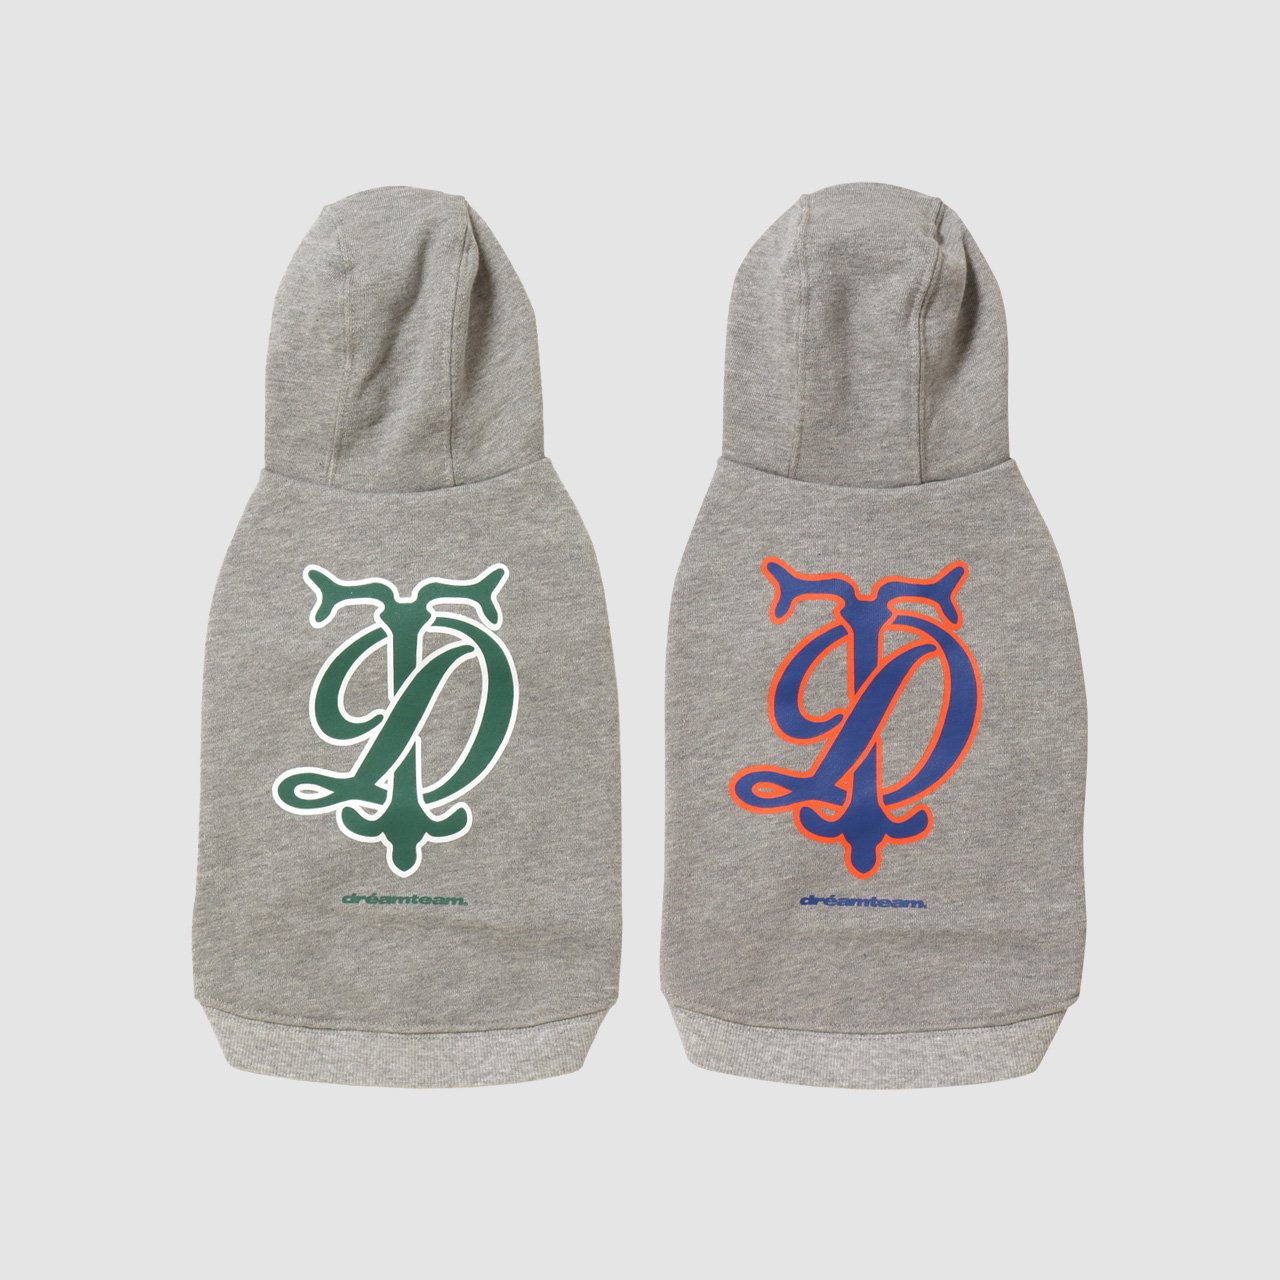 <img class='new_mark_img1' src='https://img.shop-pro.jp/img/new/icons35.gif' style='border:none;display:inline;margin:0px;padding:0px;width:auto;' />DT Vintage Logo Dog Hooded Pullover